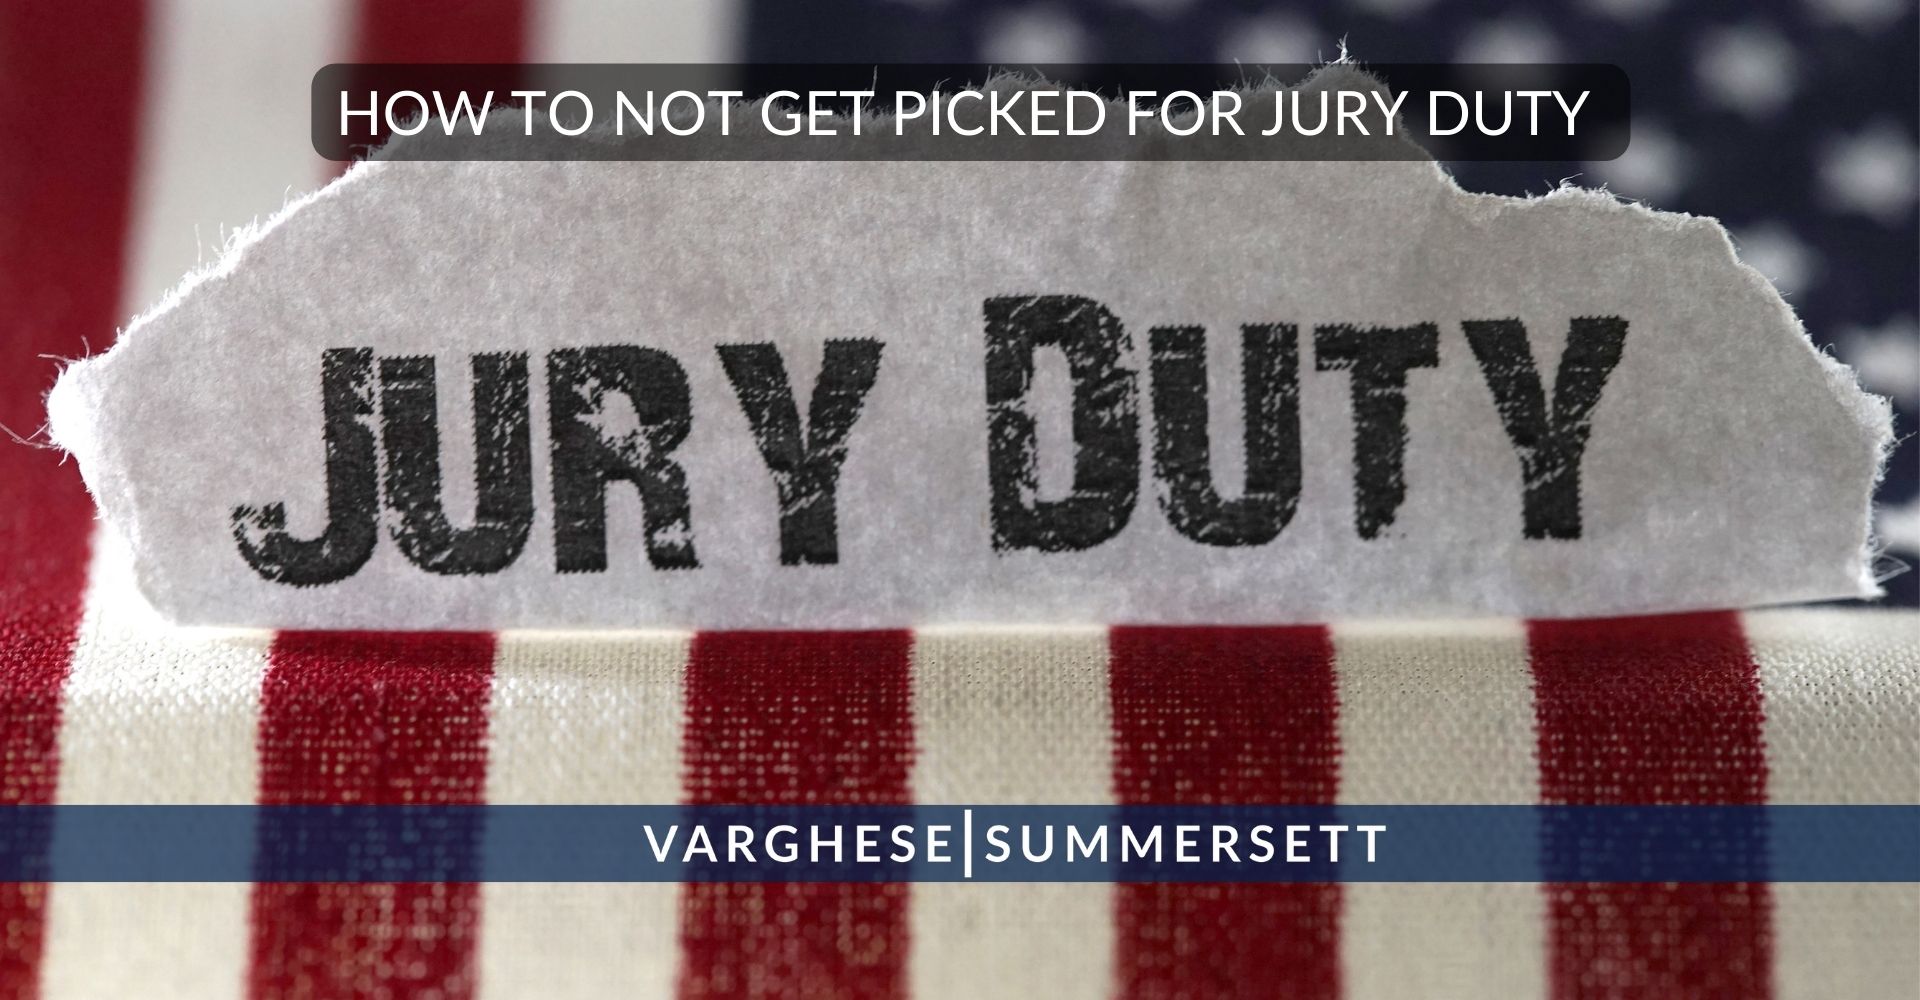 How to Not Get Picked for Jury Duty